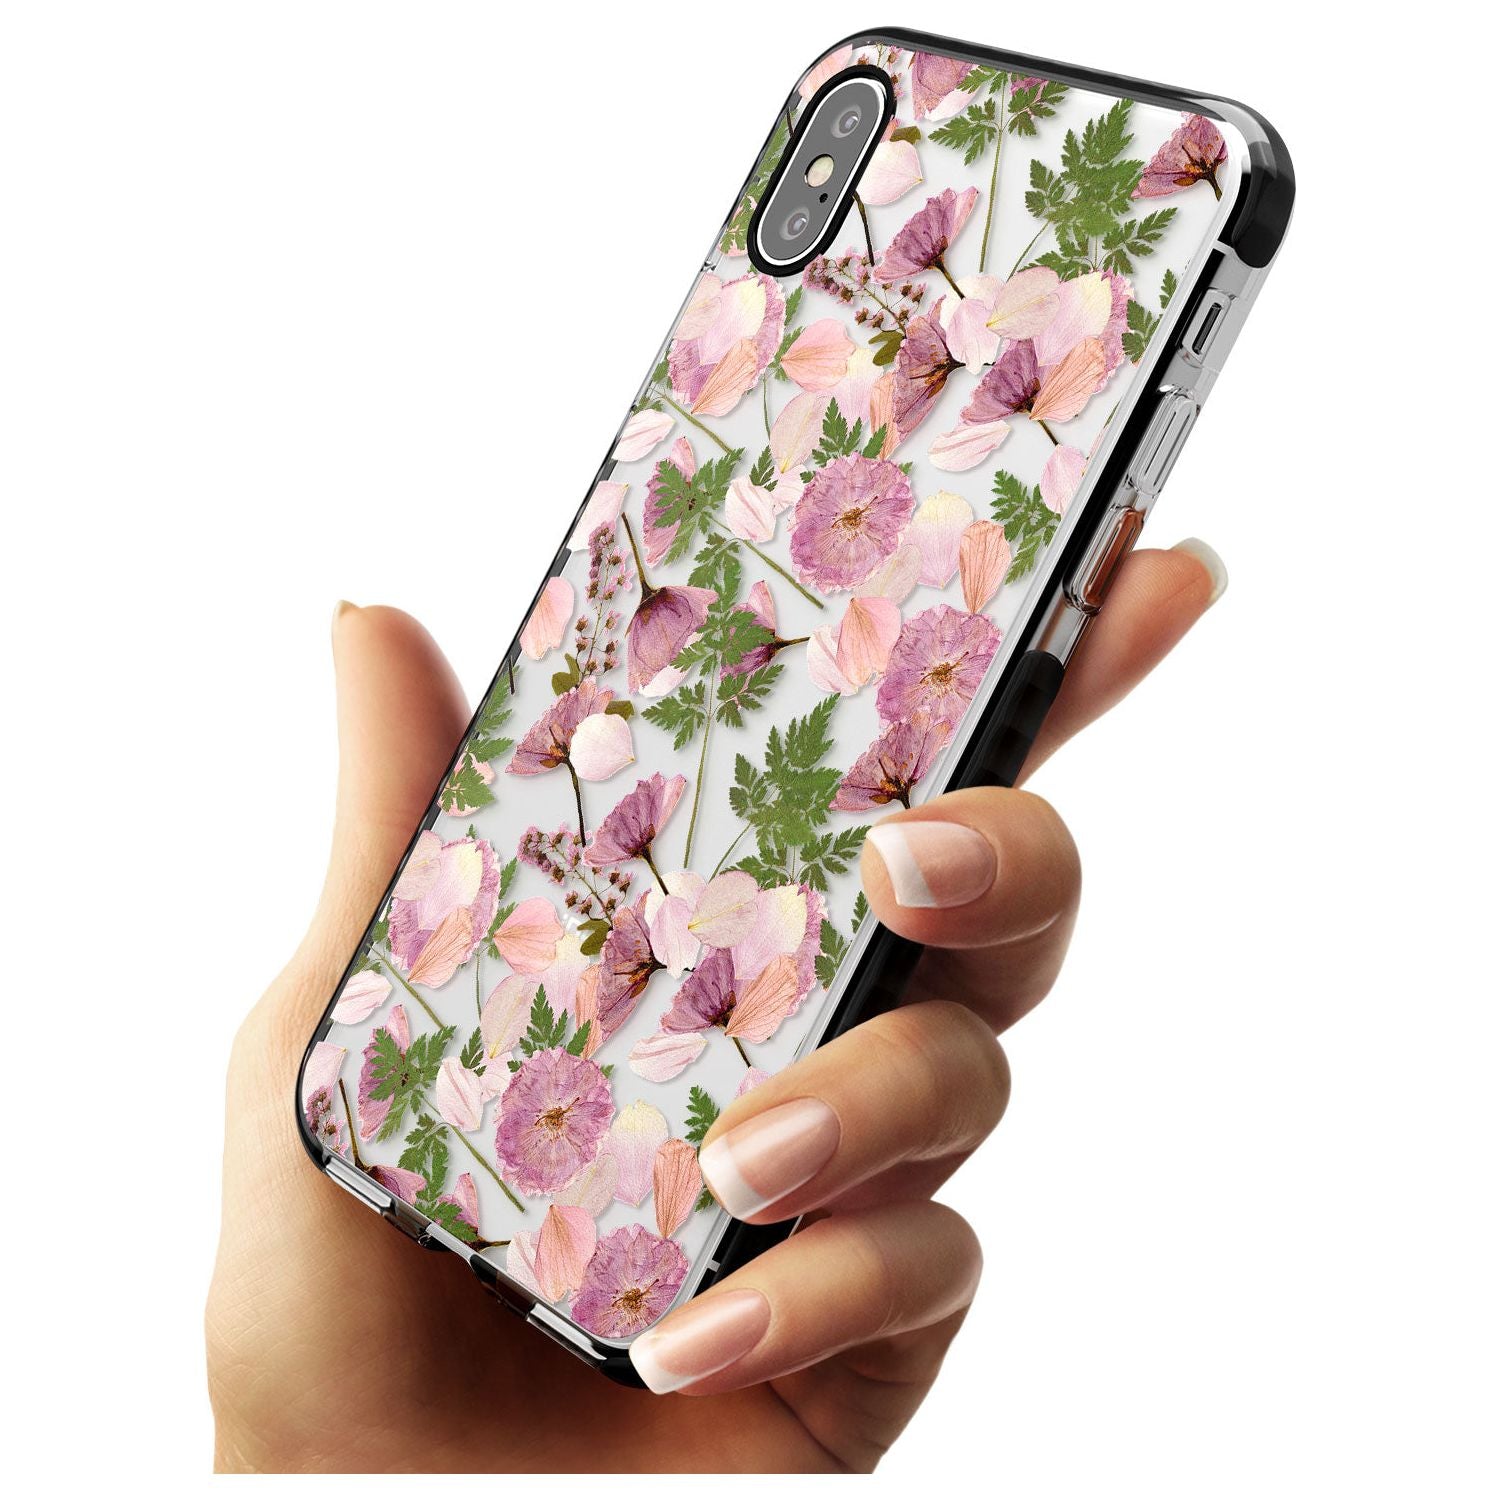 Leafy Floral Pattern Transparent Design Black Impact Phone Case for iPhone X XS Max XR